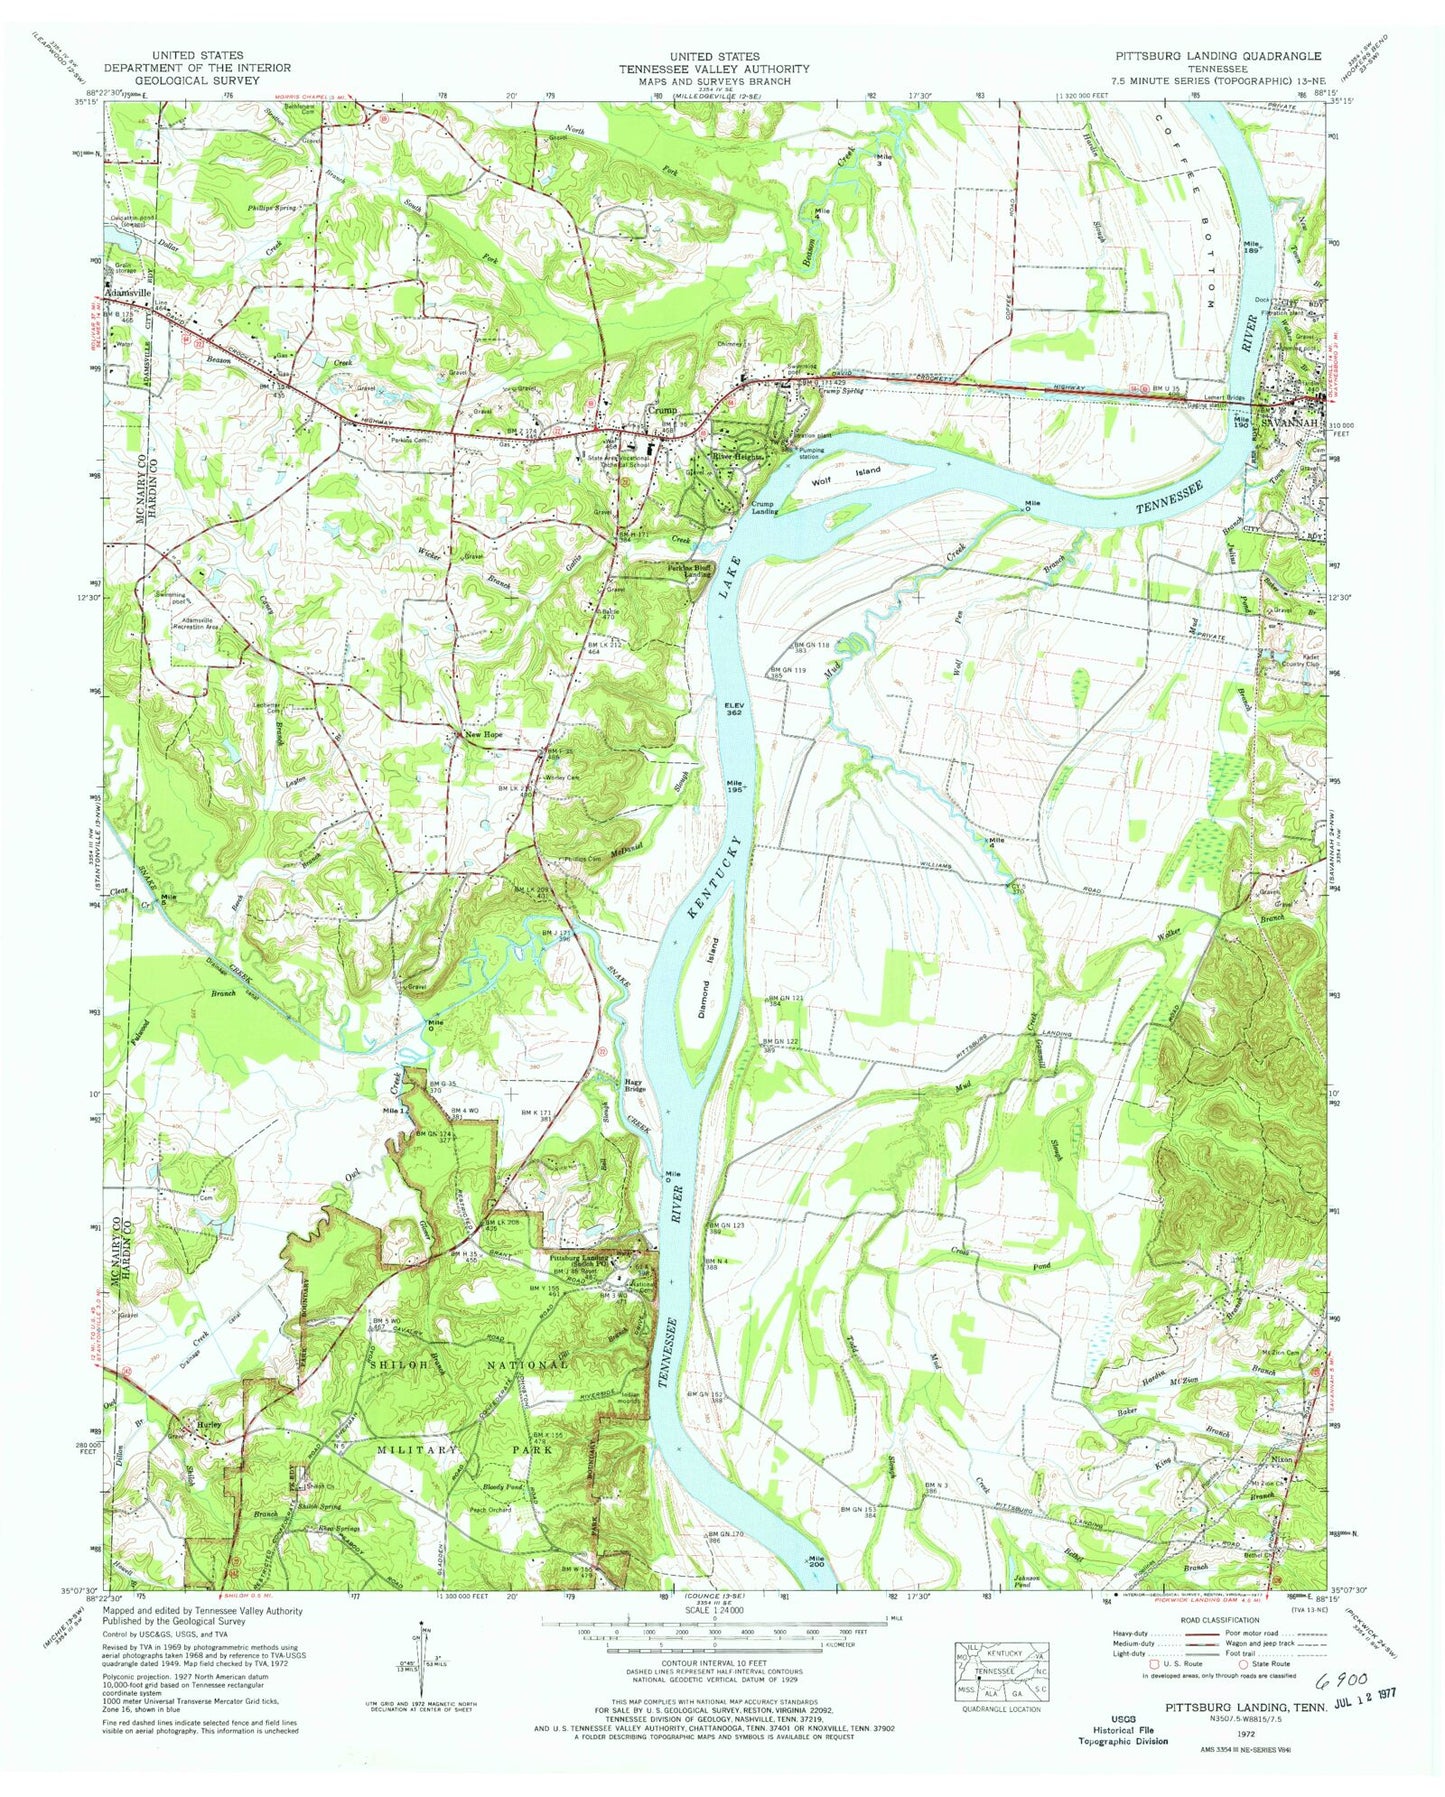 Classic USGS Pittsburg Landing Tennessee 7.5'x7.5' Topo Map Image